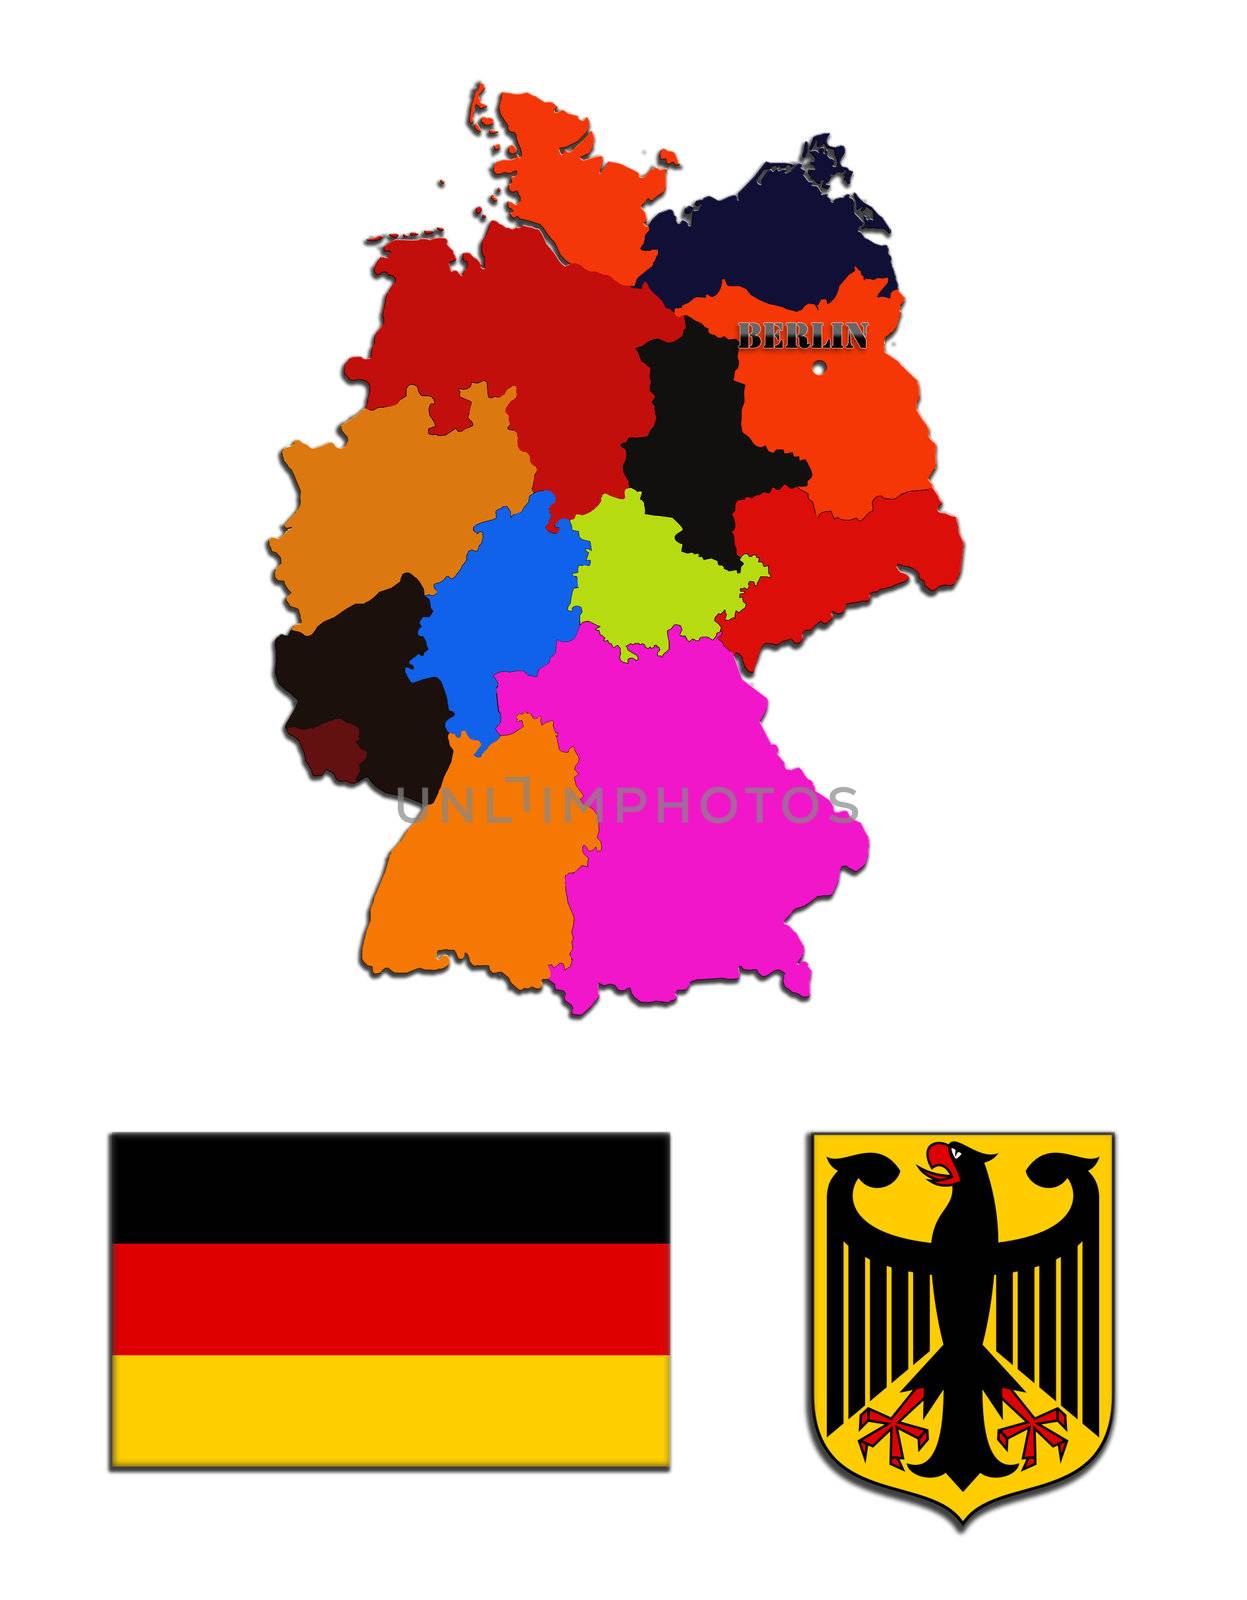 Coloured map, flag and herb of Germany